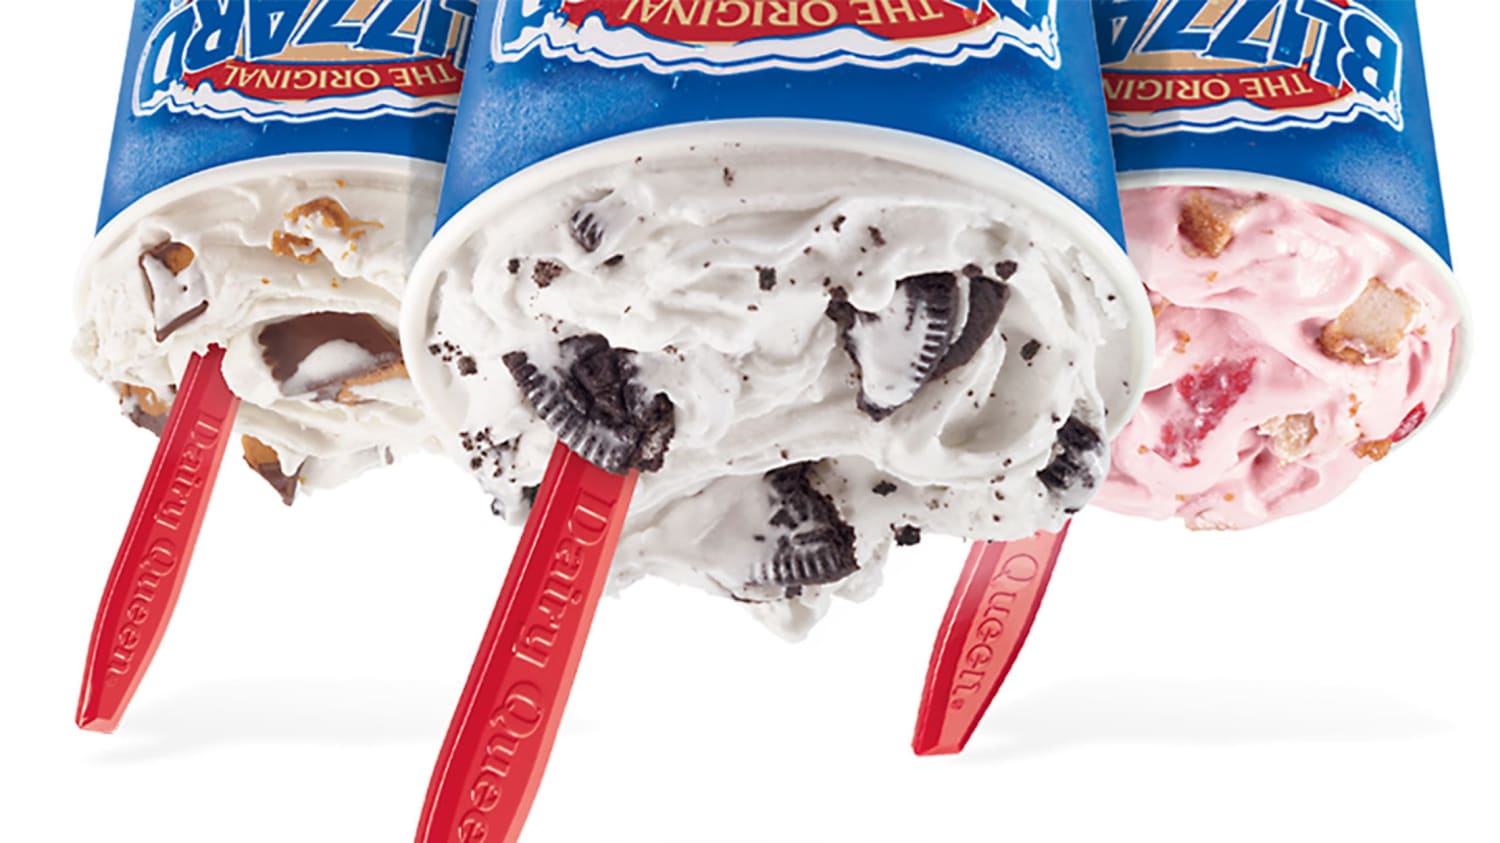 Why Are Dairy Queen Blizzards Served Upside Down?